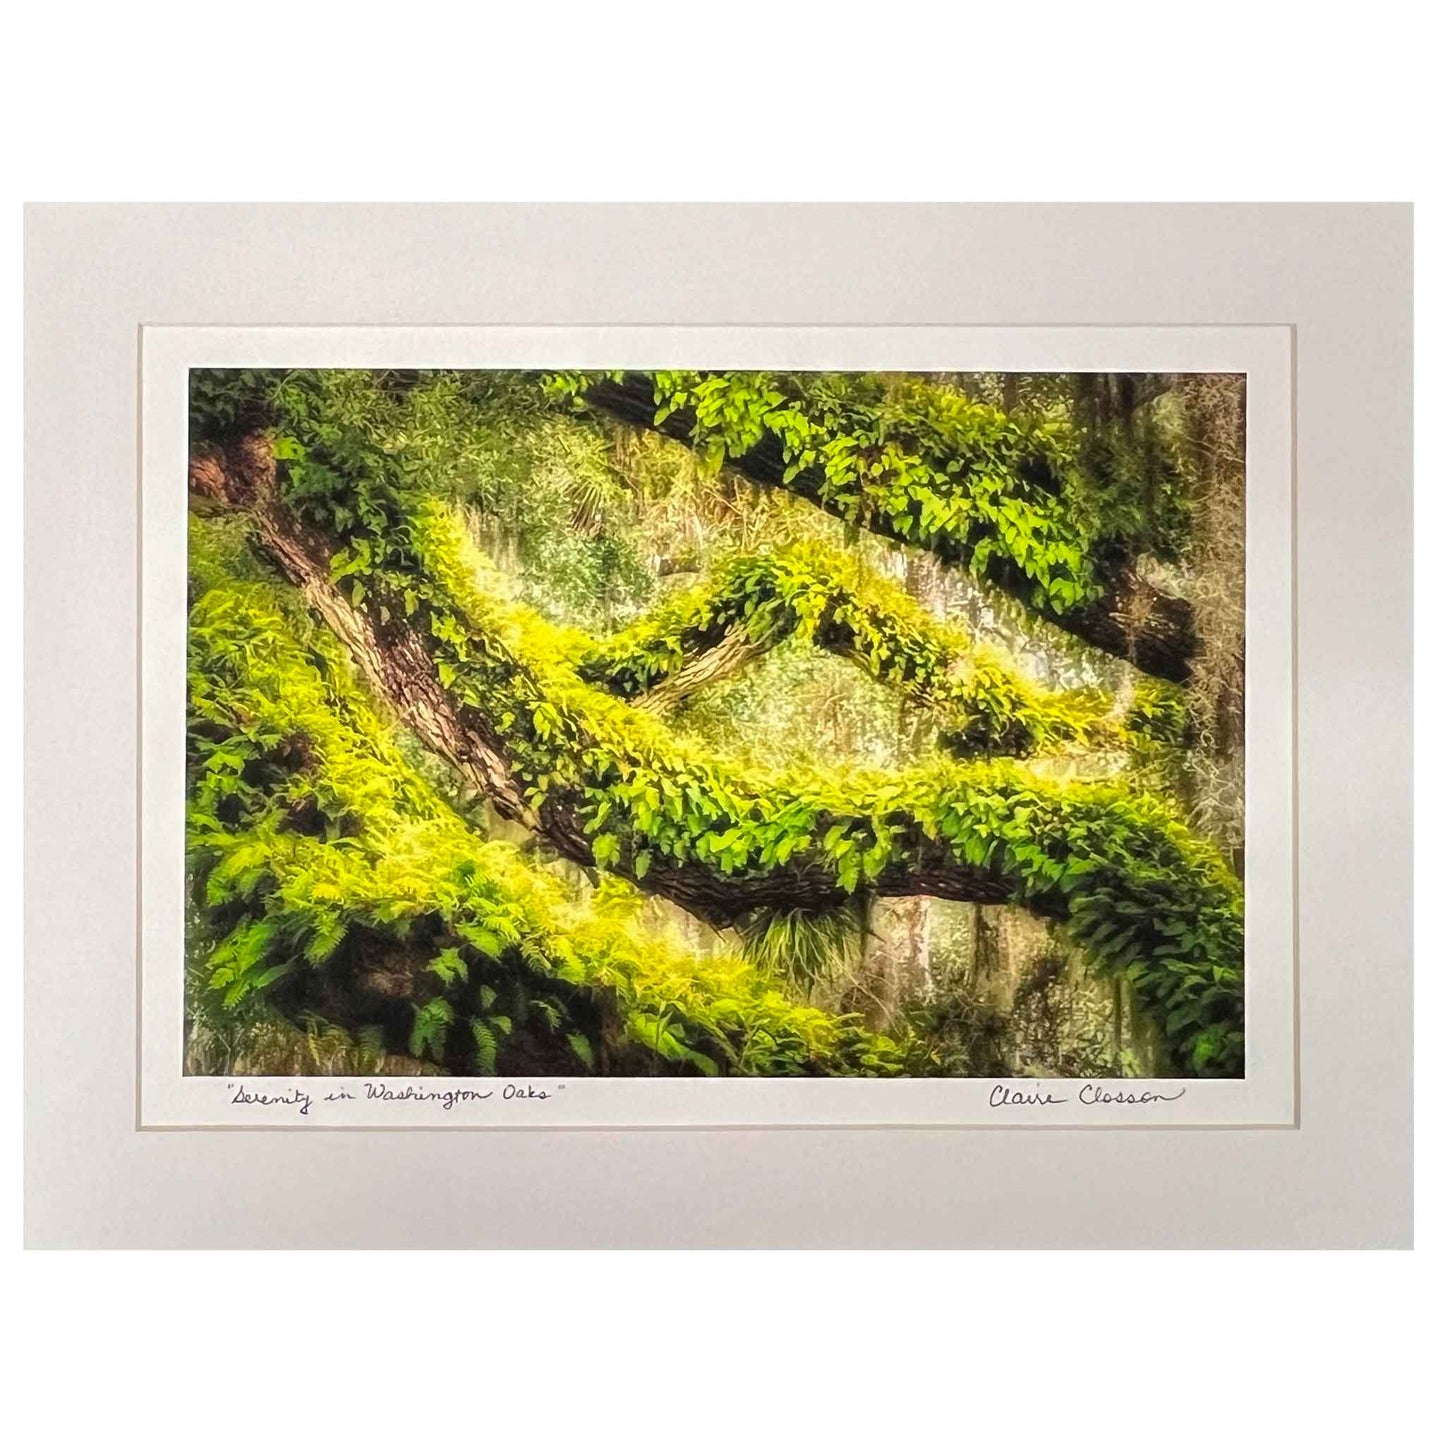 Serenity in Washington Oaks Matted Print by Photographer Claire Closson captures the beauty of Live Oaks. Magestic intertwining of branches that are clothed in lush green ivy and ferns. Highlighted by perfect sunlight, this image perfectly demonstrates the relationship between plants both great and small. 8 x 12 inches matted to 12 x 16 Inches. Ready to be framed.